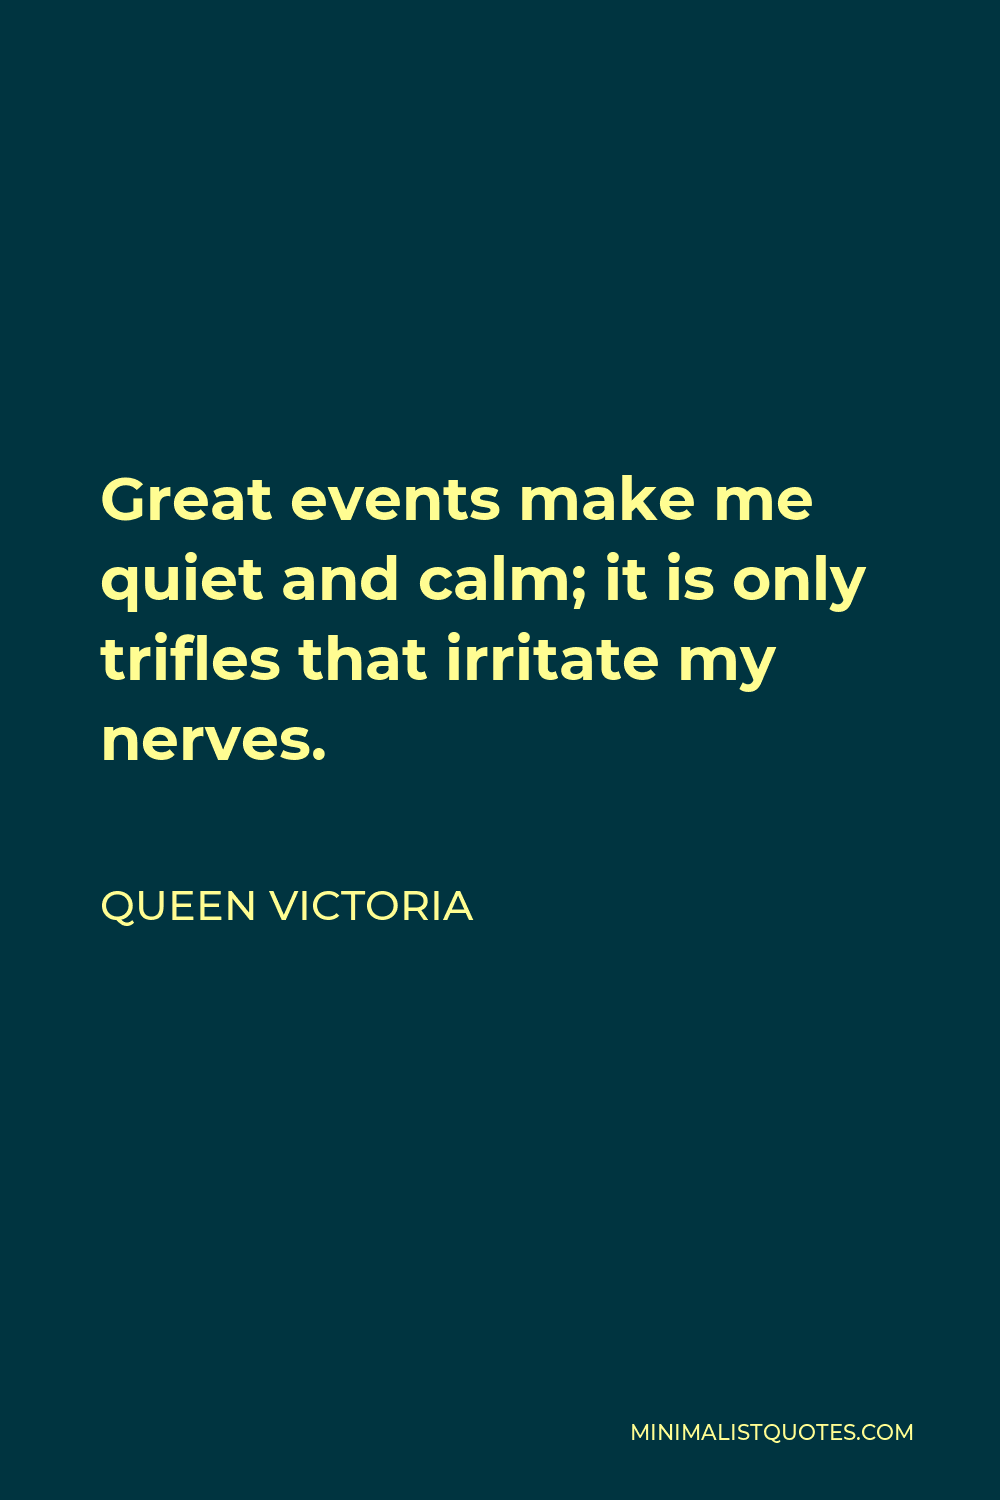 Queen Victoria Quote - Great events make me quiet and calm; it is only trifles that irritate my nerves.